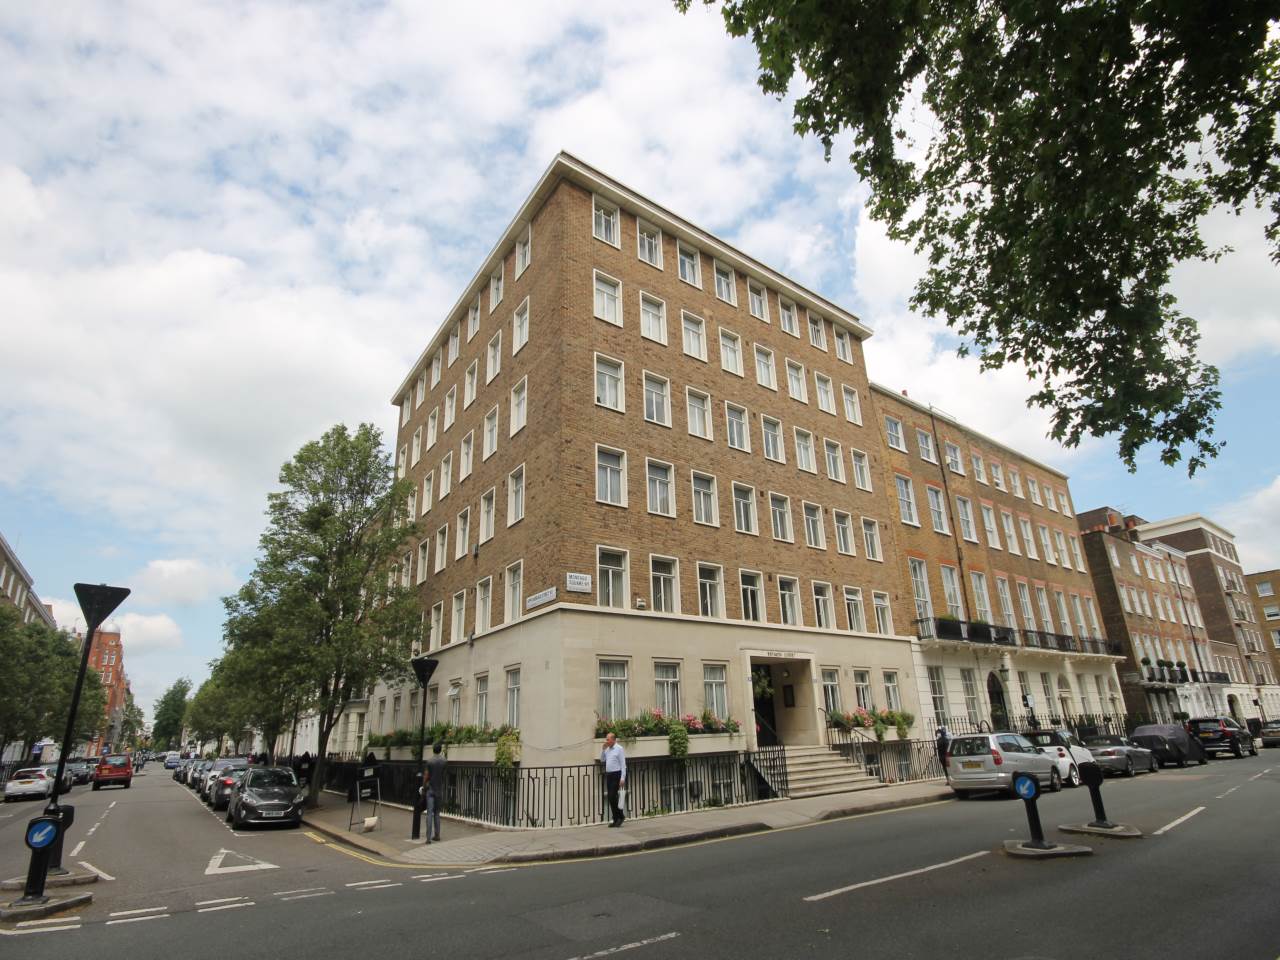 As the seller’s sole agents, we are especially delighted to offer for sale this beautifully presented lower ground floor apartment situated in a period mansion block. The location is moments away from Oxford street and a whole variety of shops, bars and restaurants. There is a choice of three underground stations which are conveniently located, Marble Arch, Baker Street and Marylebone. Accommodation is bright and airy throughout and offers one double bedroom with fitted wardrobes, a beautifully fitted kitchen with integrated appliances, an open reception room and a very well presented bathroom. Additional features include: Underfloor heating, porter service, Residents only access to Montagu Square gardens, and an unexpired lease term in excess of 900 years. We understand the service charge is approximately £1200 per annum and the ground rent is £300 per annum. Offered chain free, This is a very desirable part of London. Offers in the region of £599,999 are invited for the Leasehold interest. 